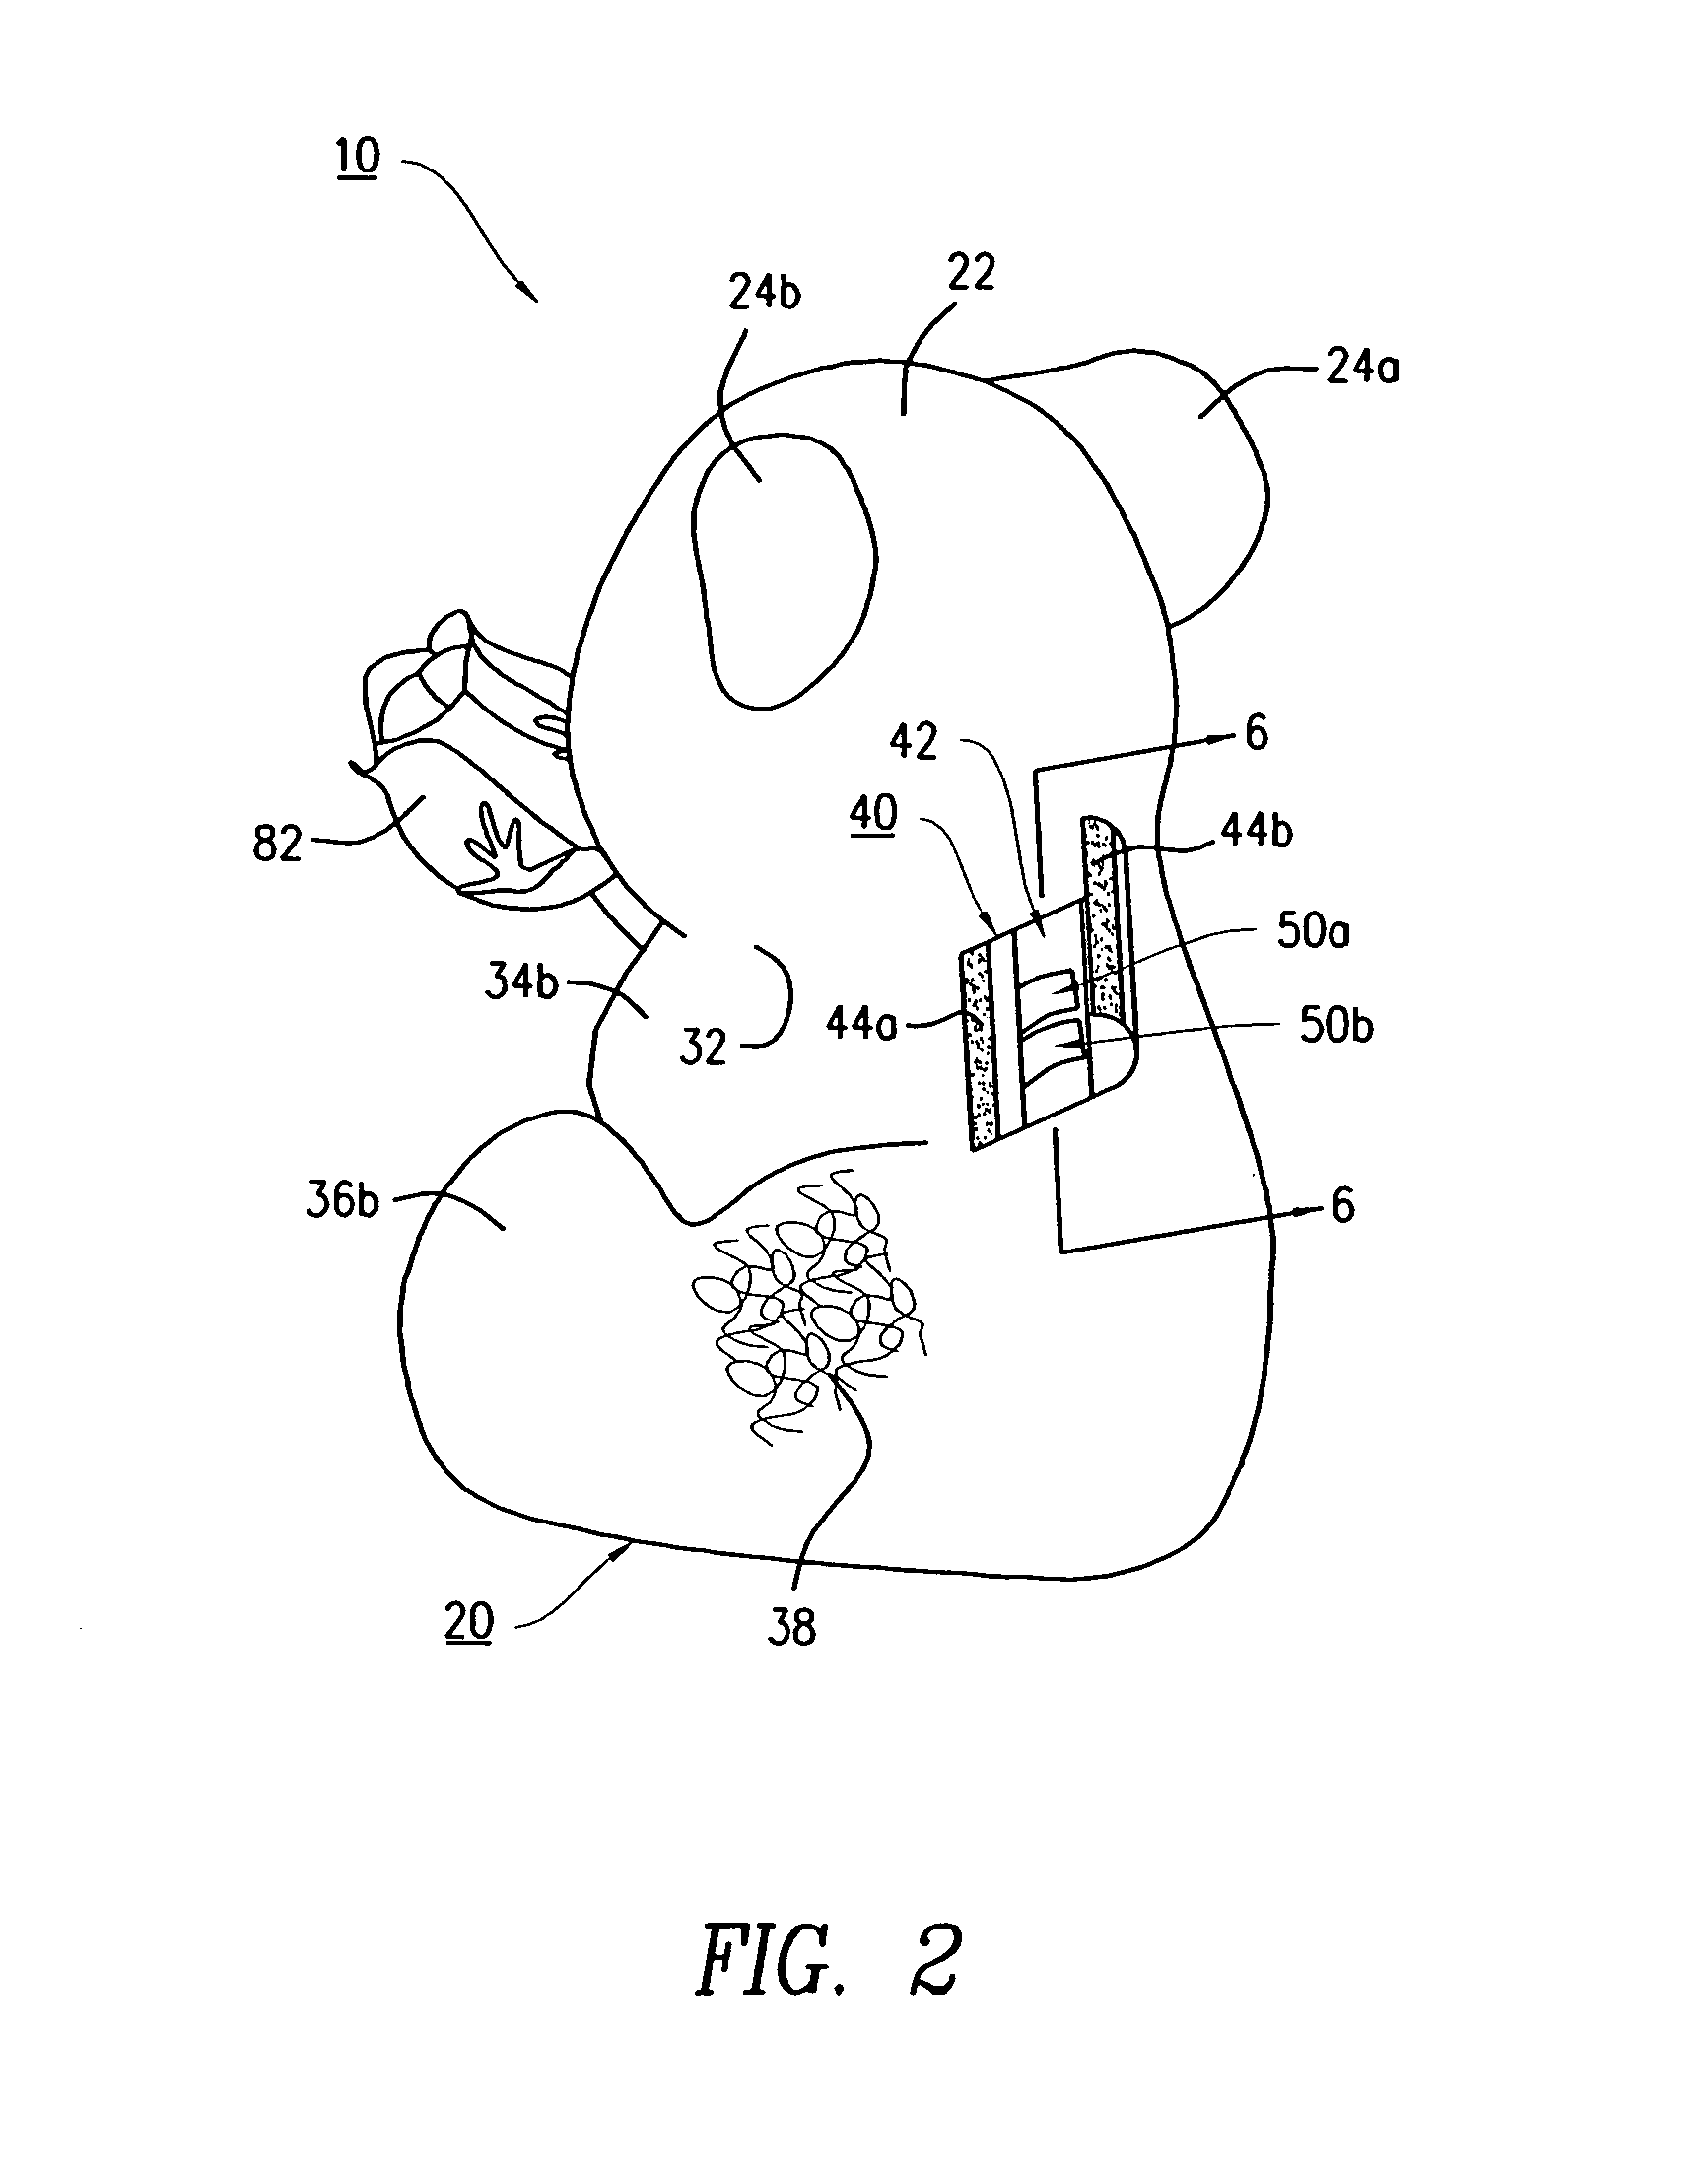 Plush toy having an integral built-in storage compartment for dispensing a ribbon therefrom